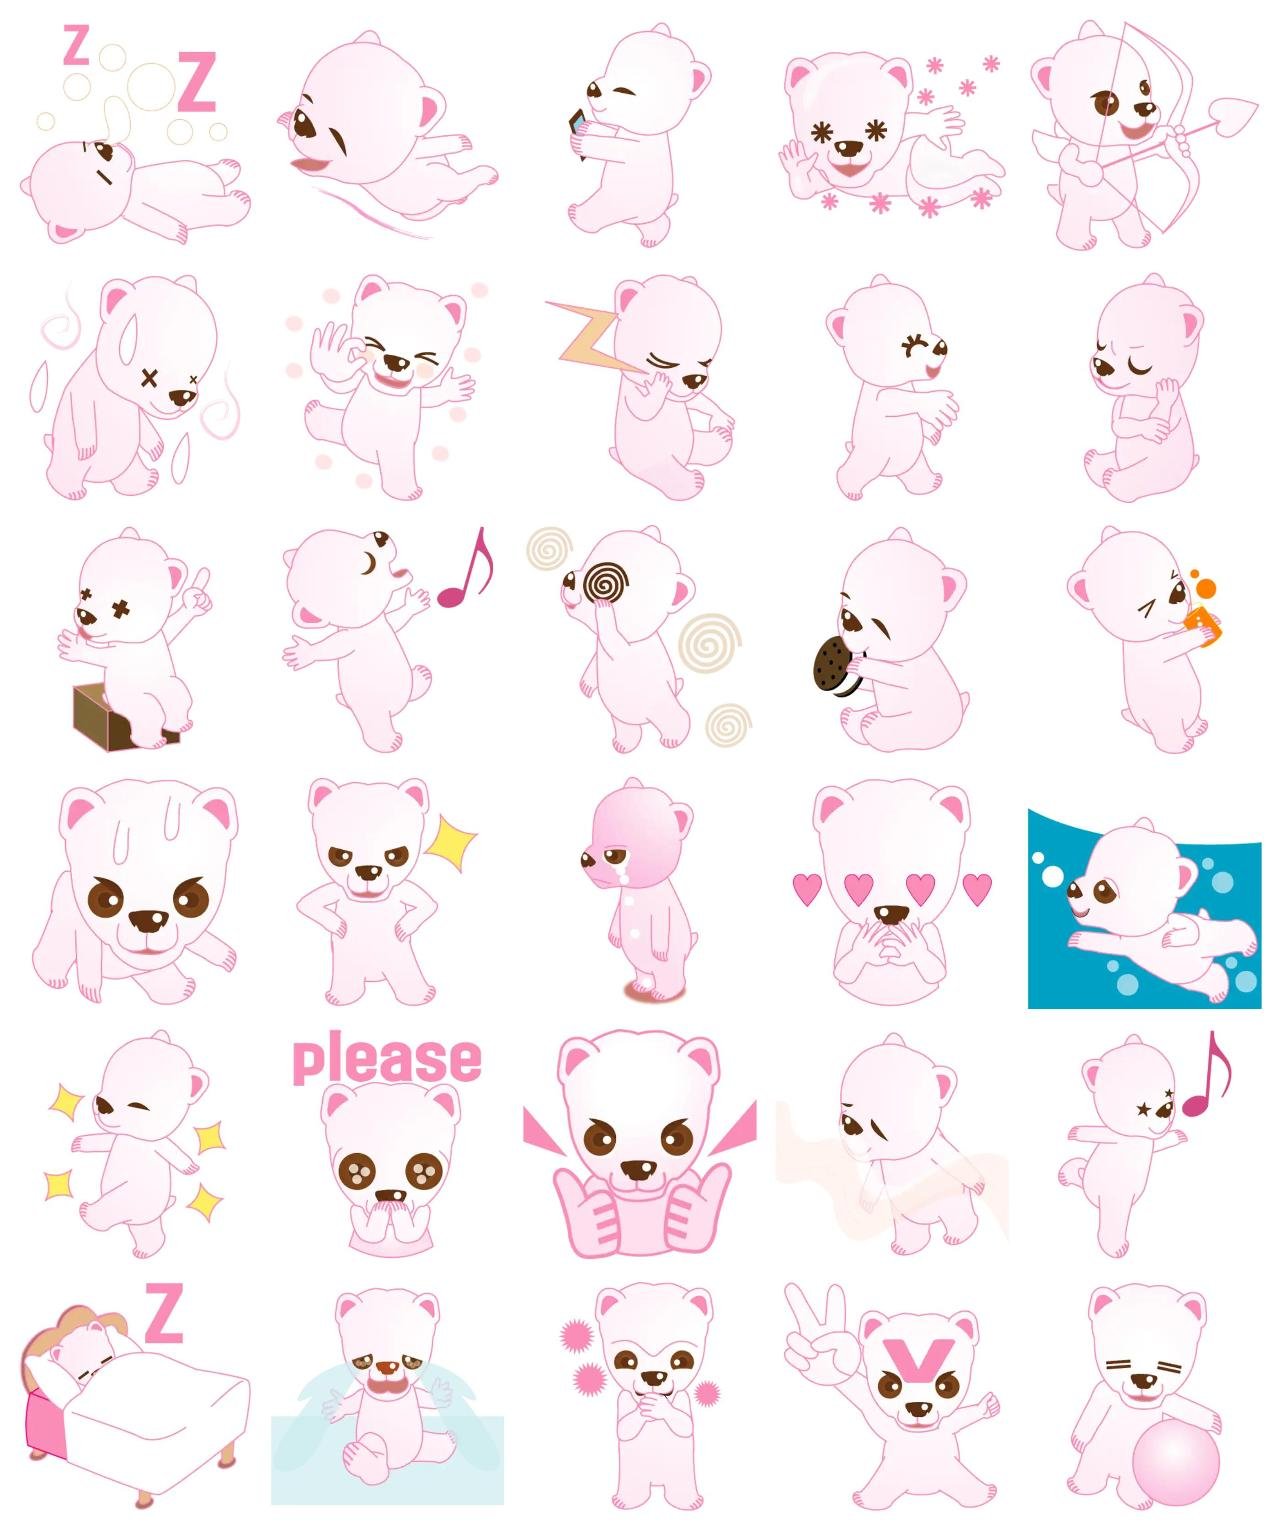 Pink jelly bear Animation/Cartoon,Animals sticker pack for Whatsapp, Telegram, Signal, and others chatting and message apps